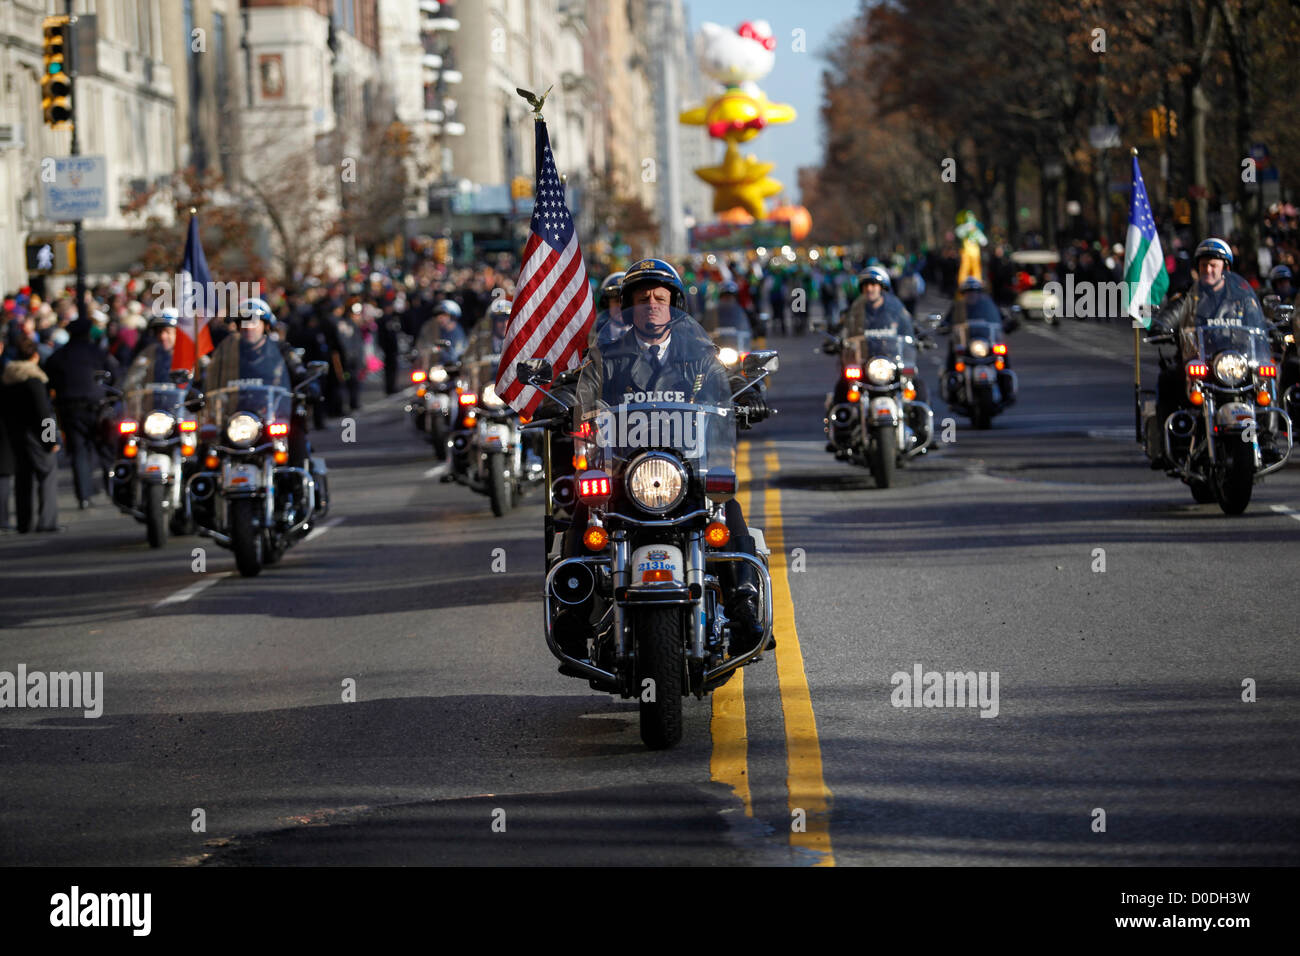 New York Police Department motorcycle officers lead Macy's Thanksgiving Day Parade in New York City, on Thursday, Nov. 22, 2012. Stock Photo